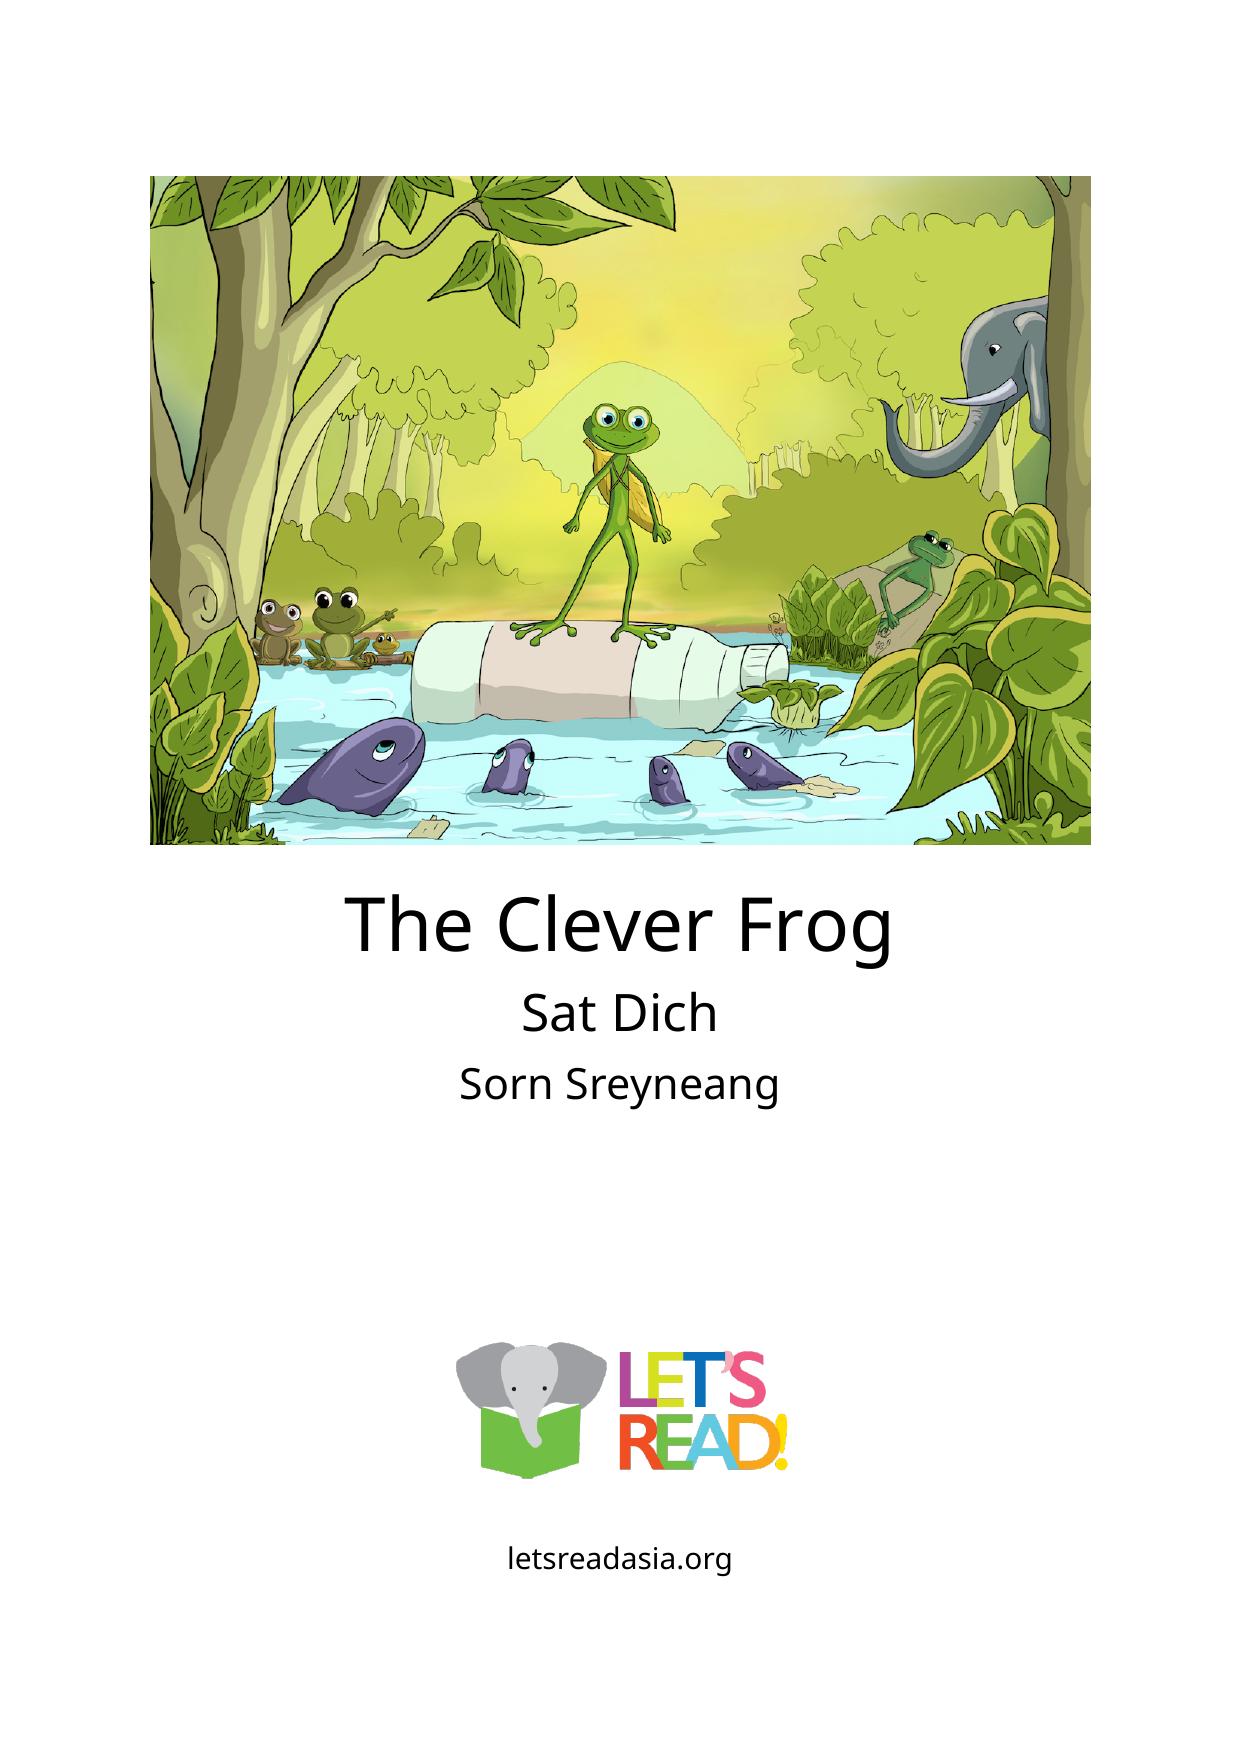 The Clever Frog